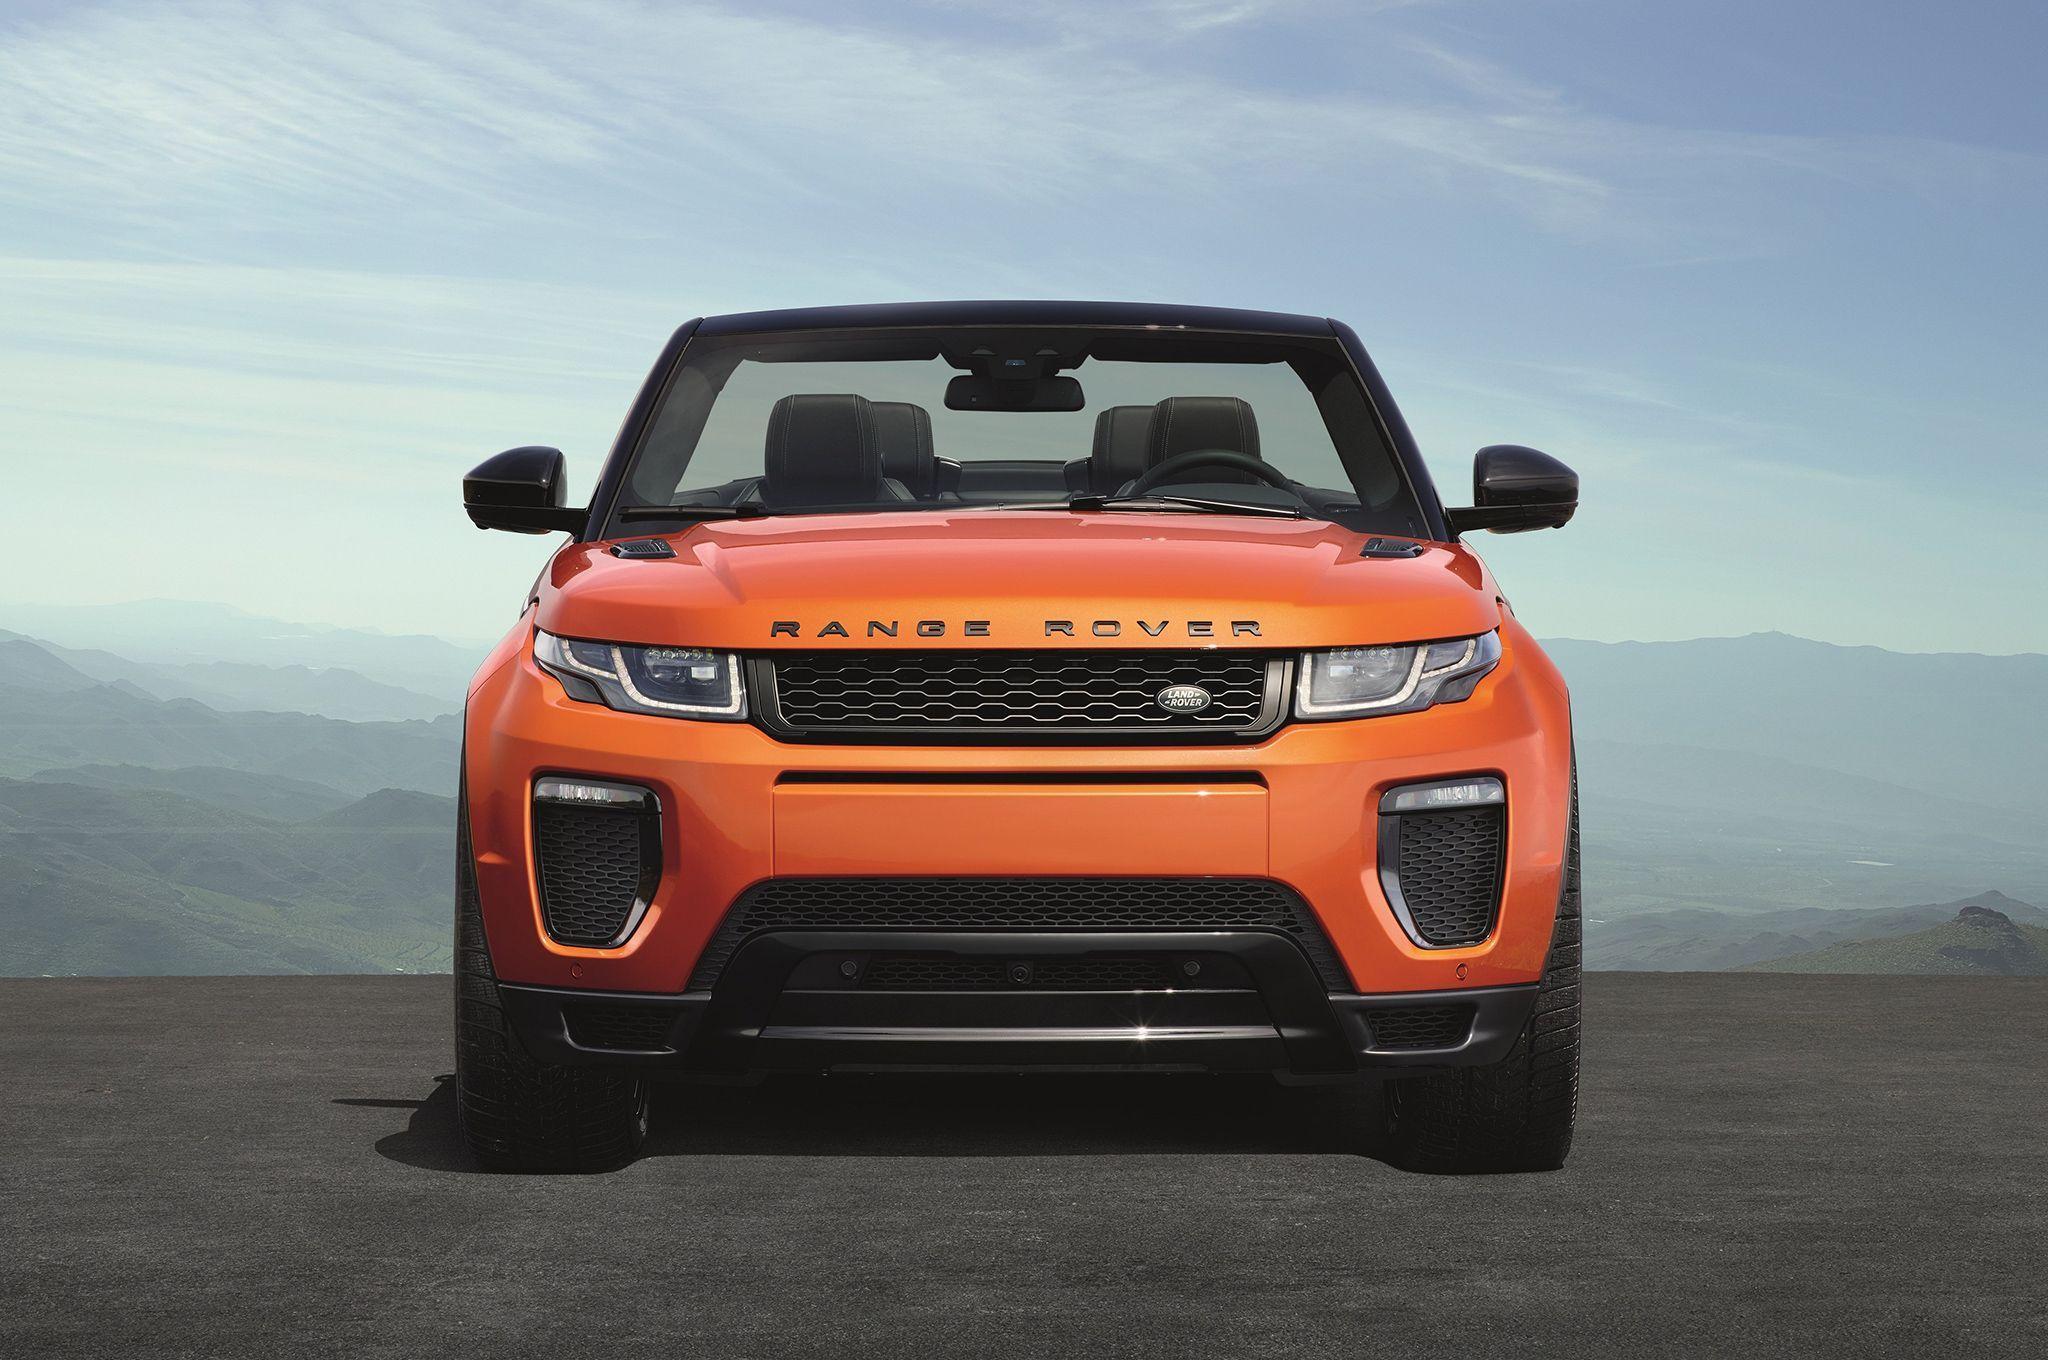 Things to Know about the 2017 Range Rover Evoque Convertible